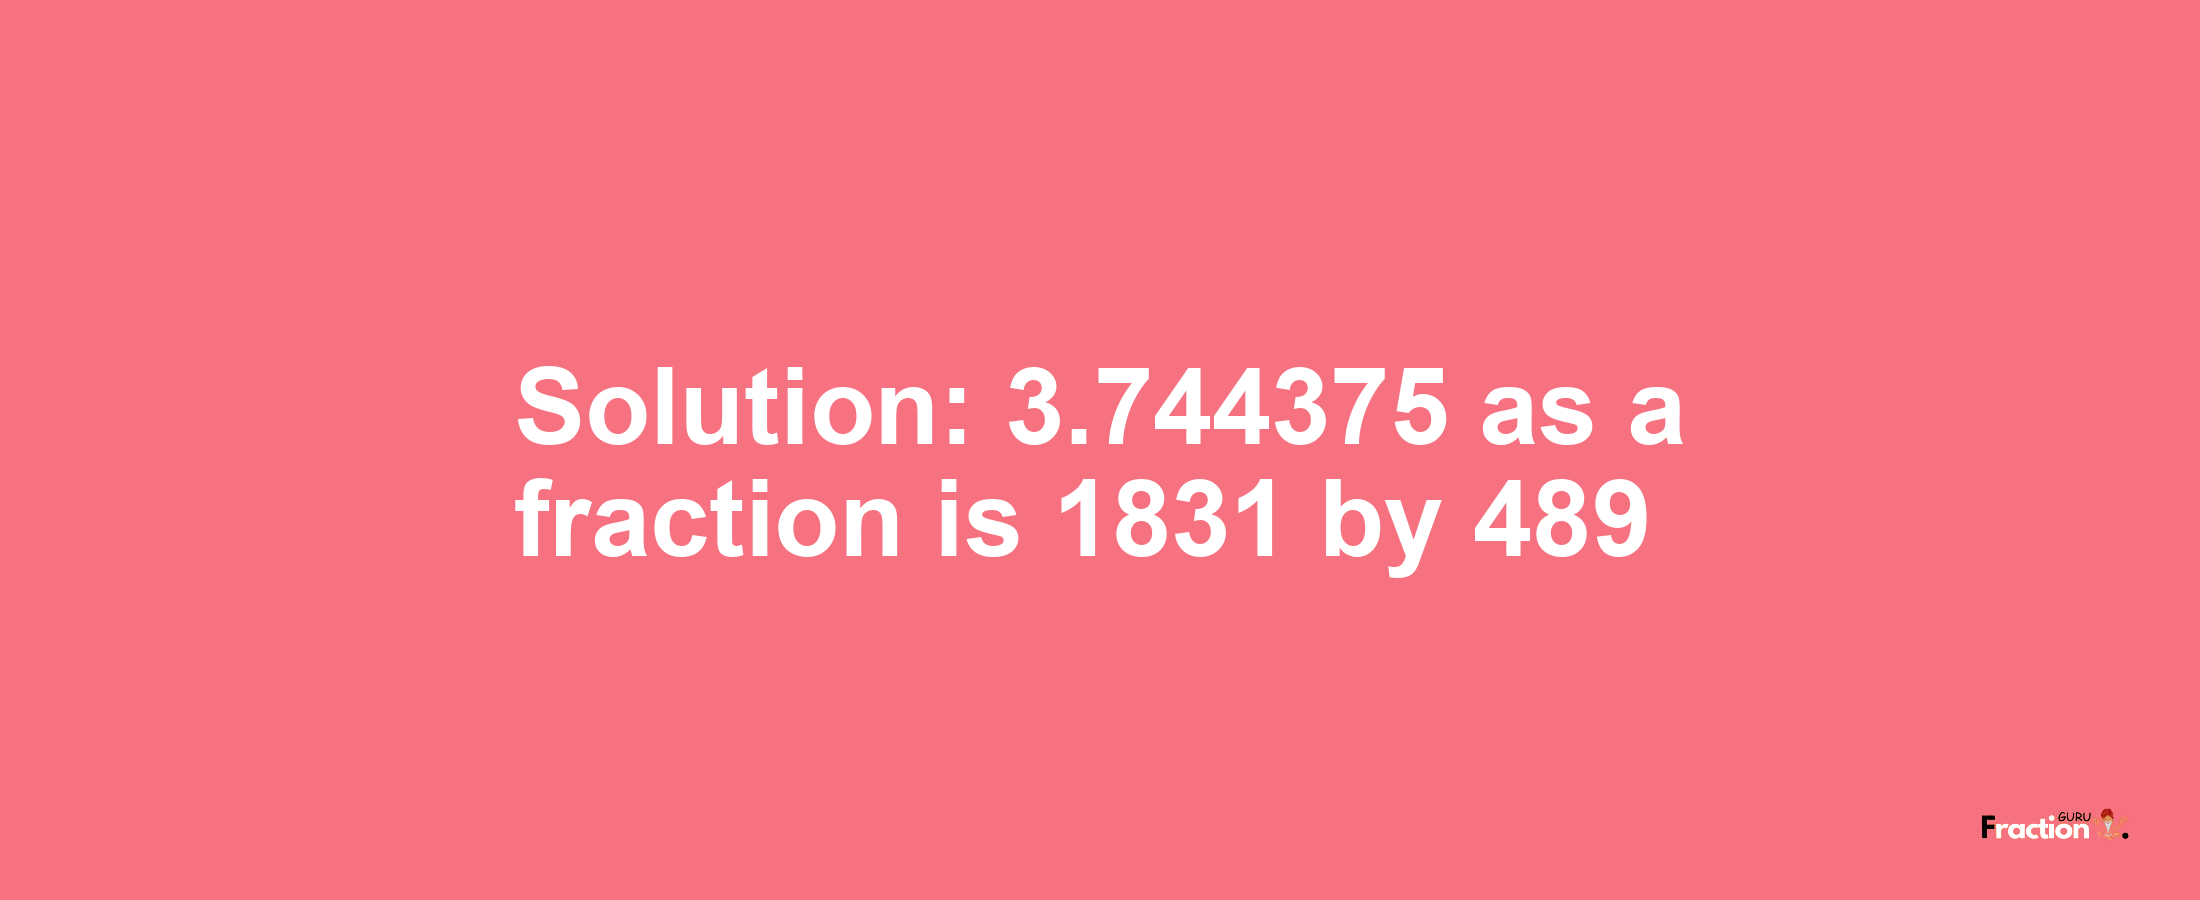 Solution:3.744375 as a fraction is 1831/489